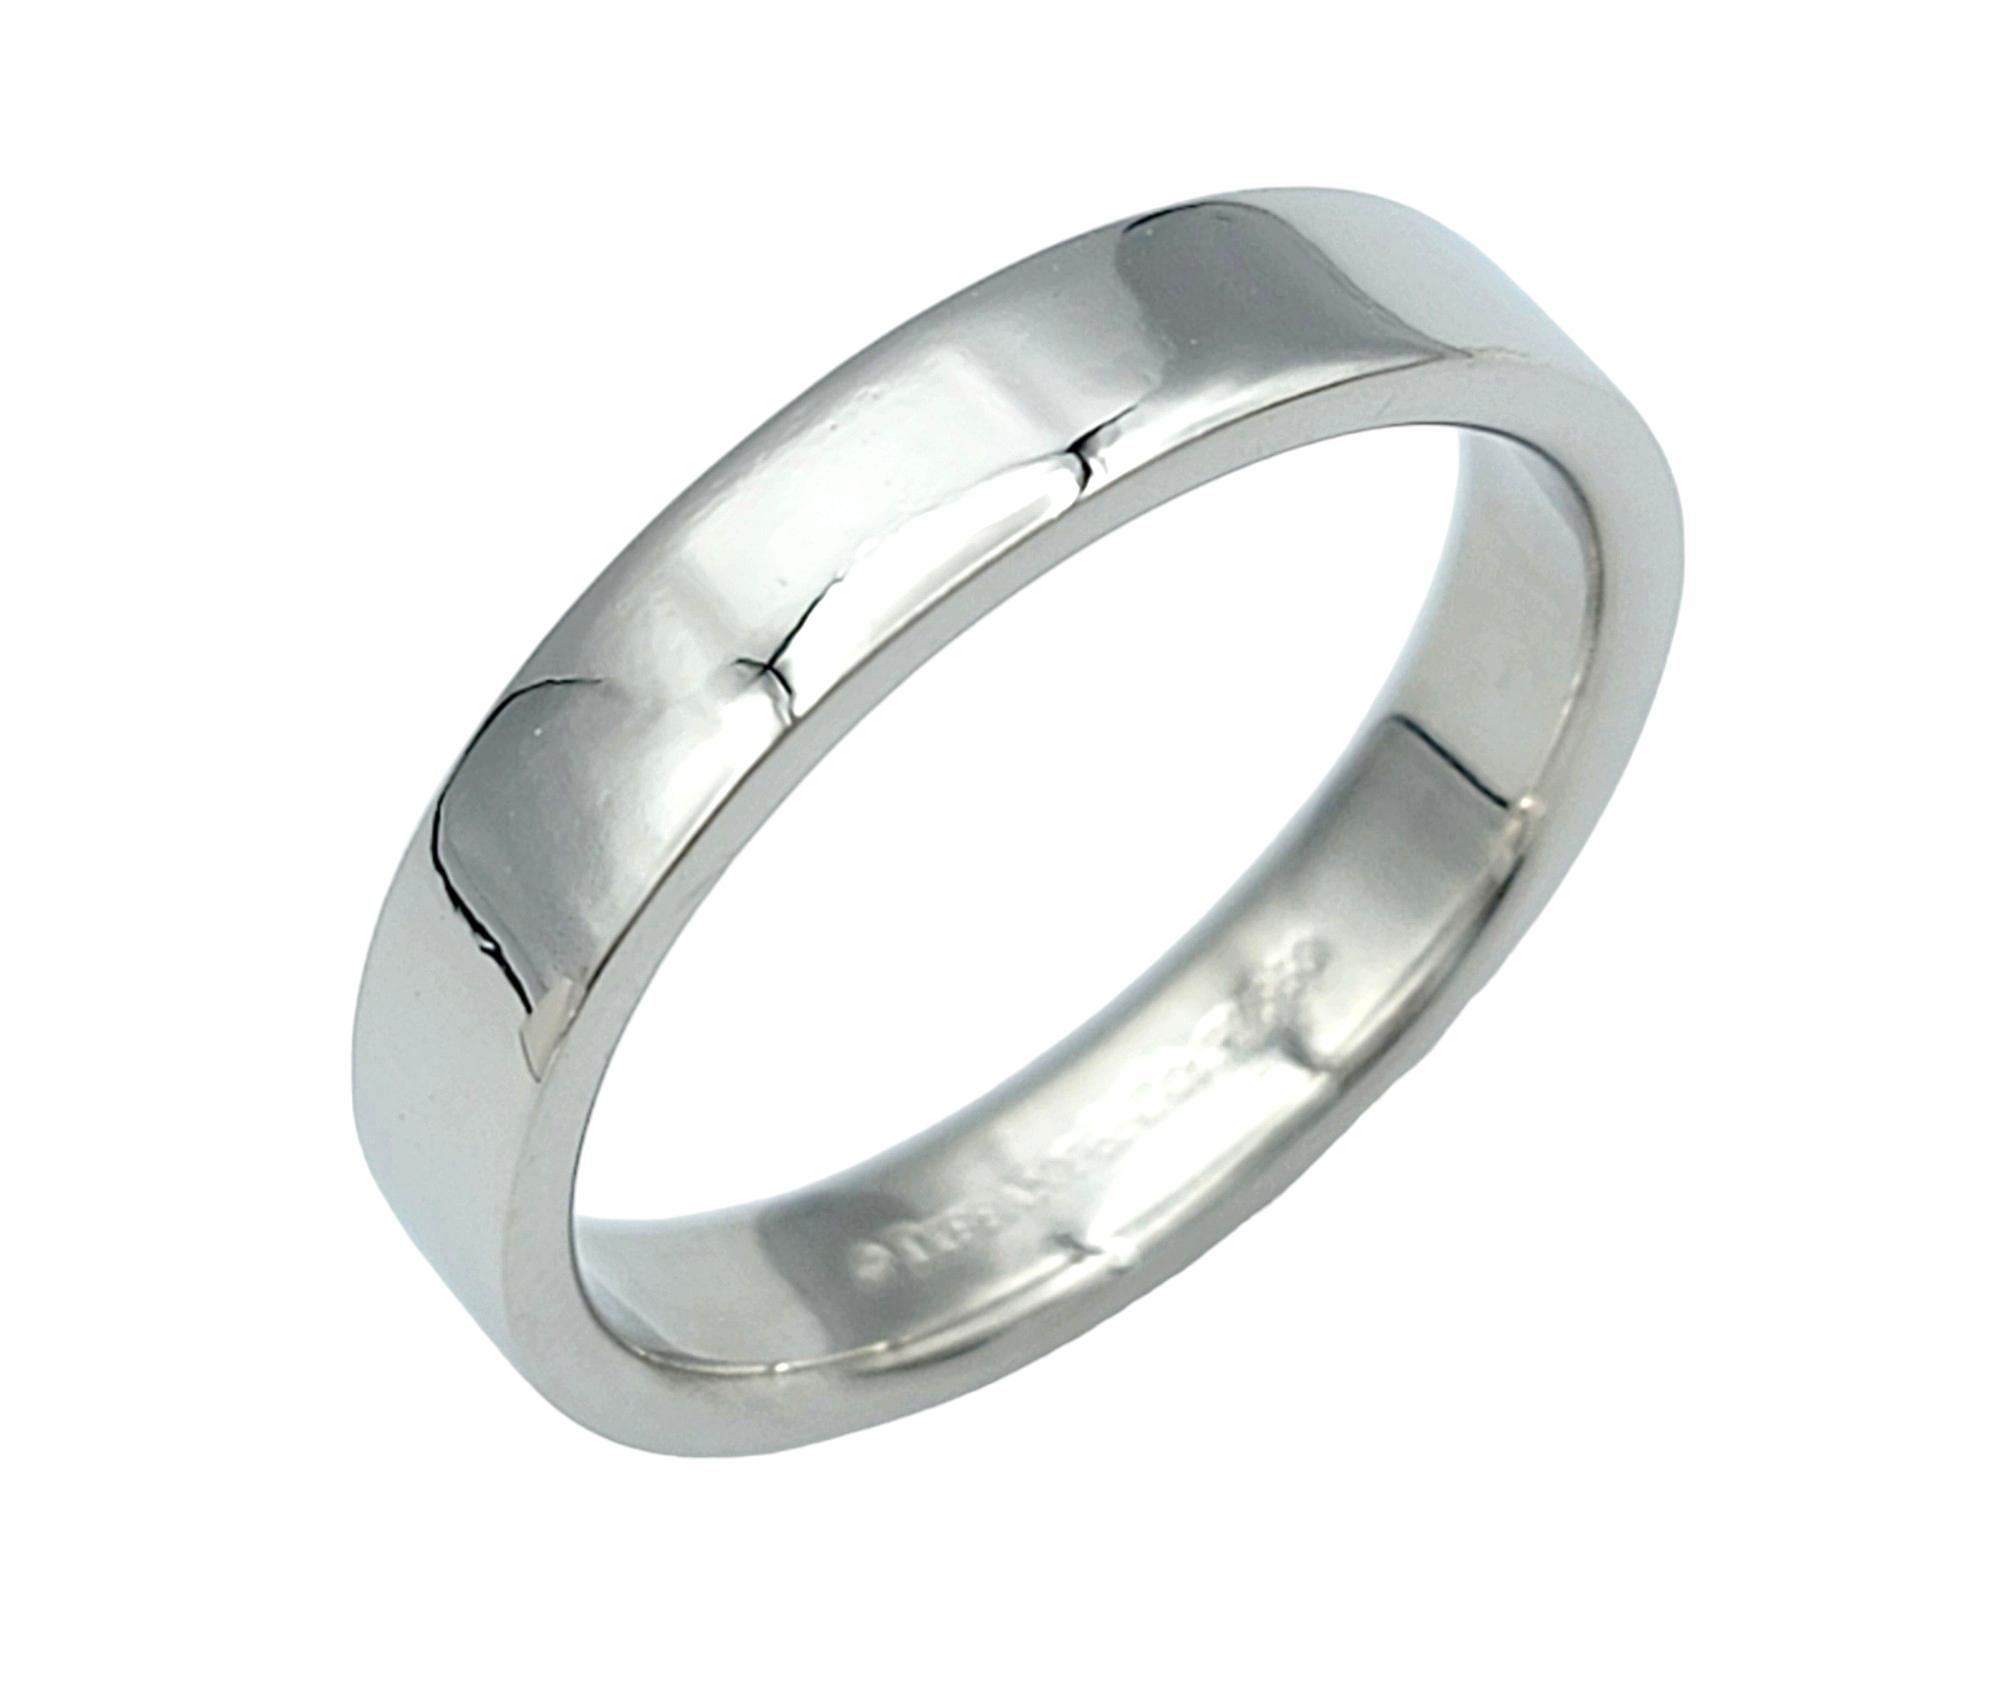 Ring Size: 6.5

This simple yet elegant Tiffany & Co. platinum band ring is a timeless accessory that exudes sophistication. Crafted from high-quality platinum, the ring boasts a sleek and polished finish that catches the light with every movement.